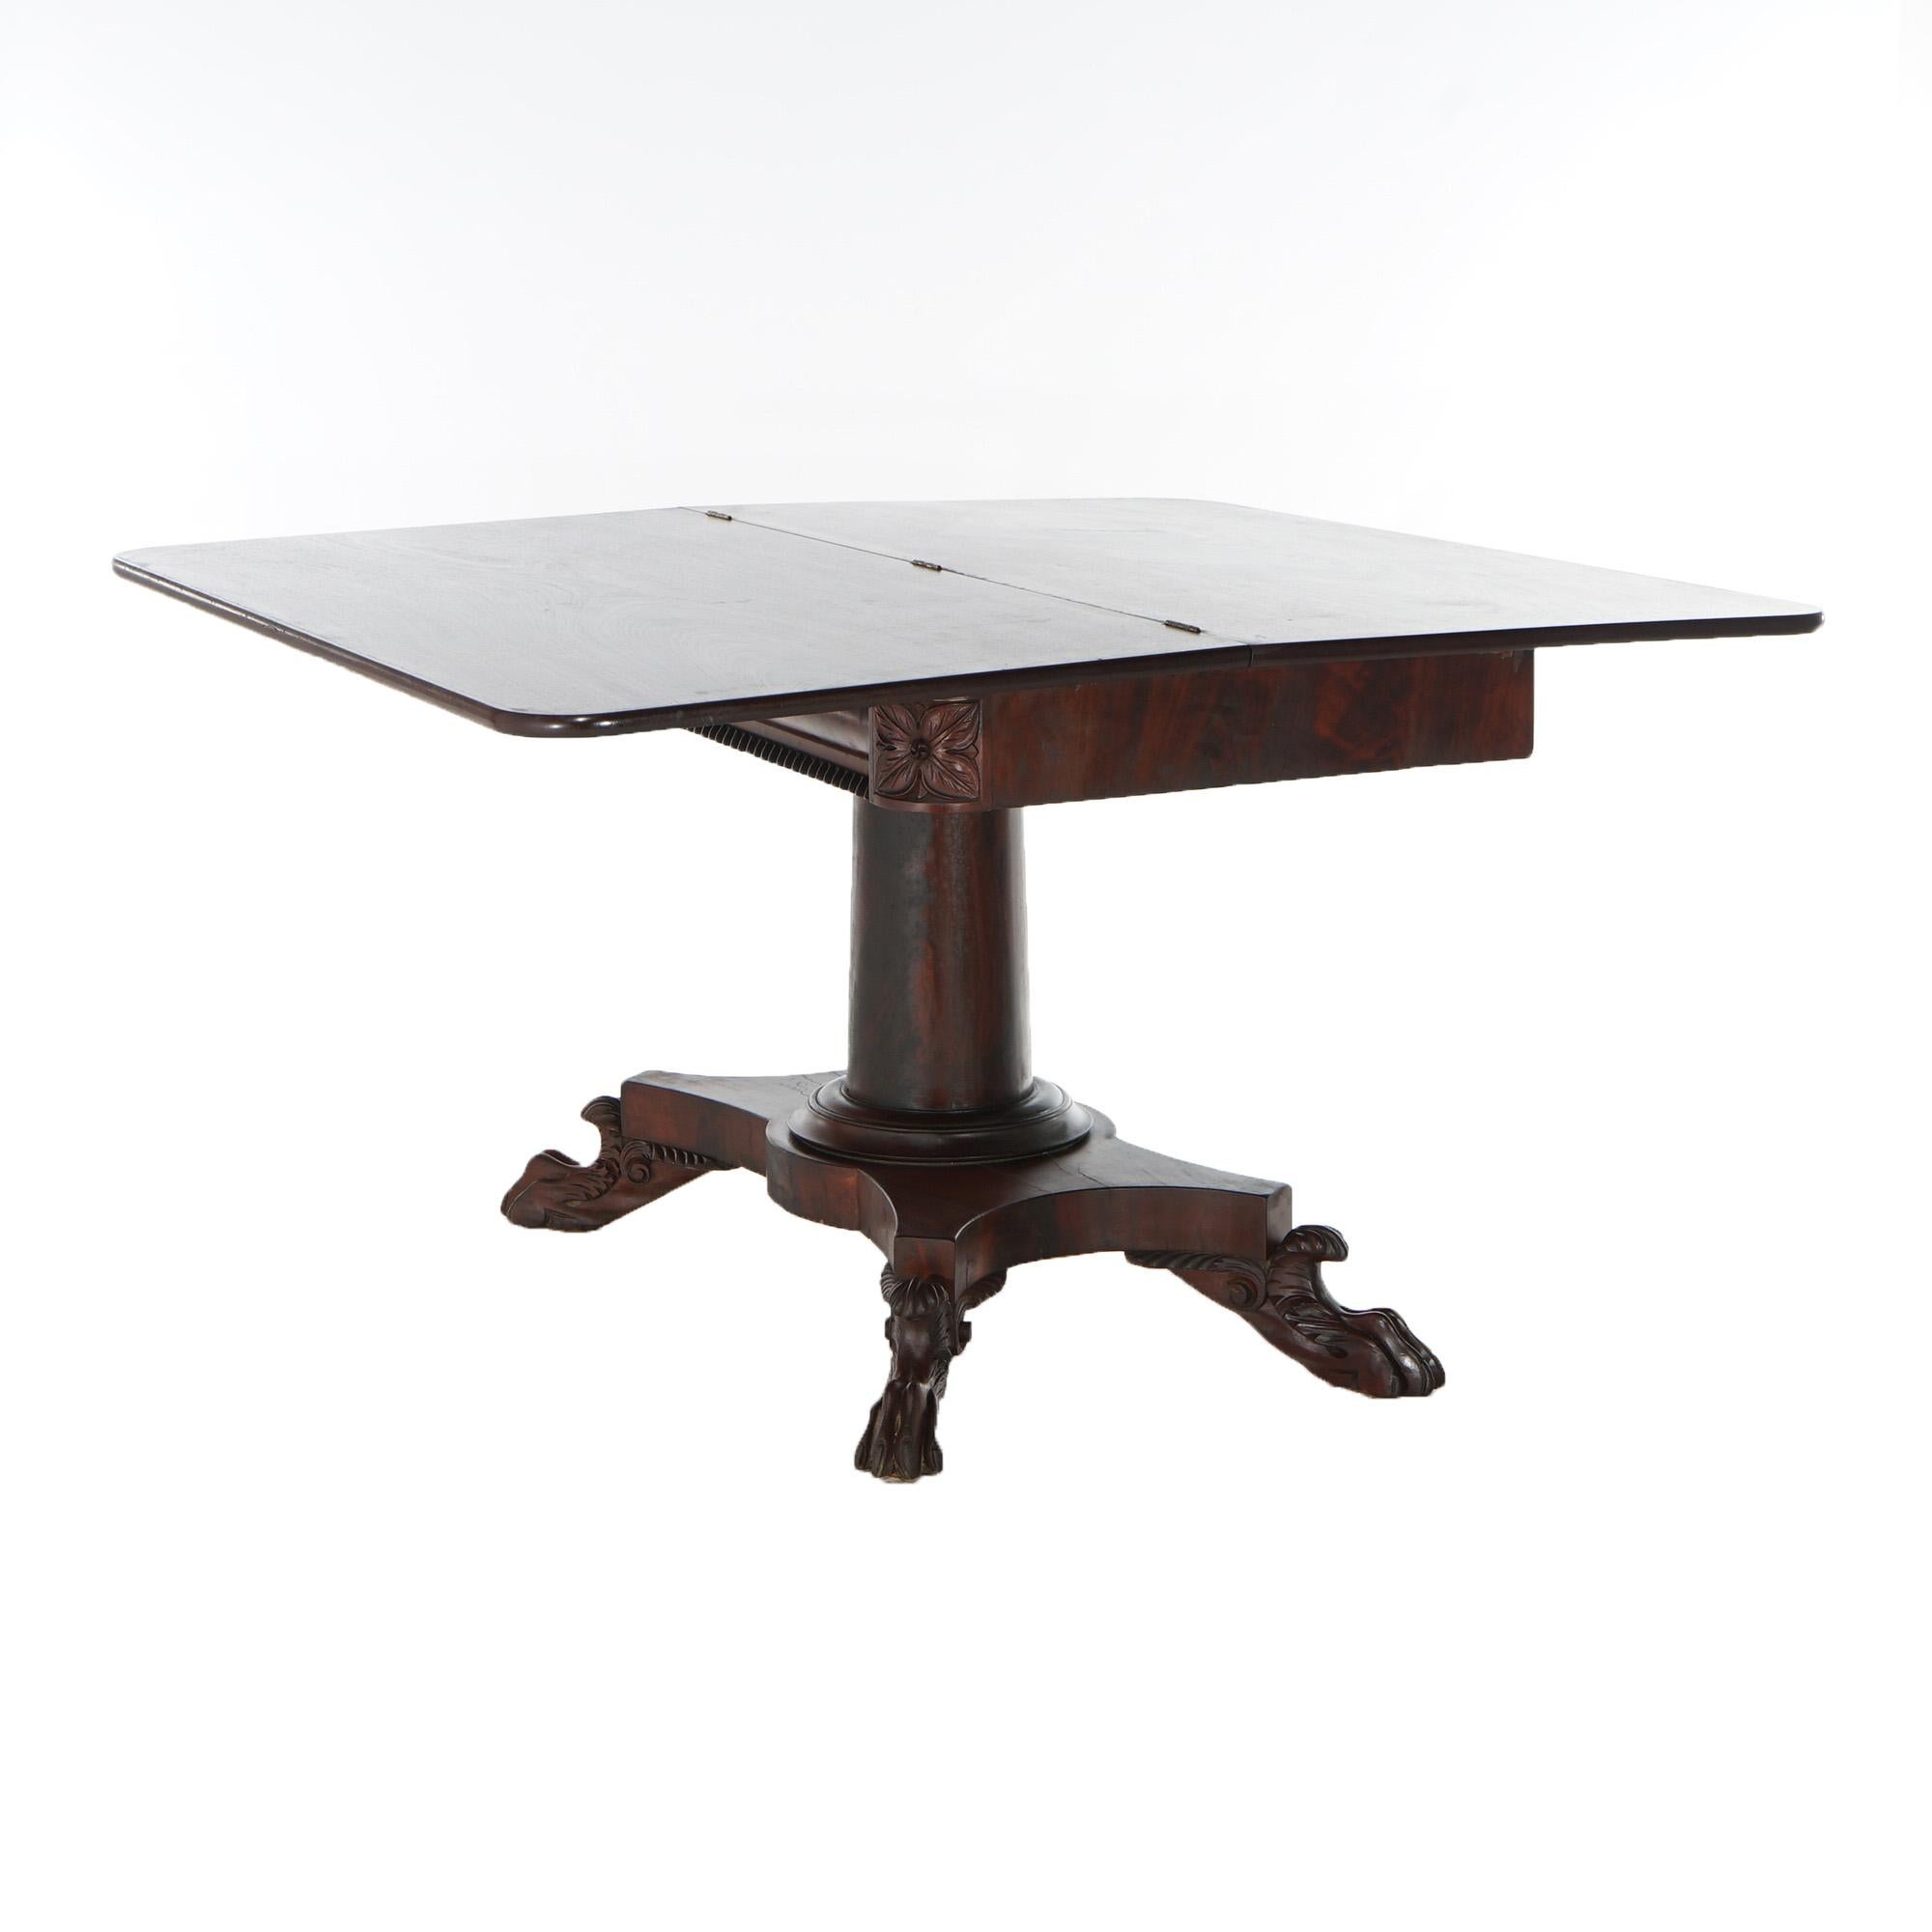 Antique American Empire Flame Mahogany Card Table Circa 1840 For Sale 5